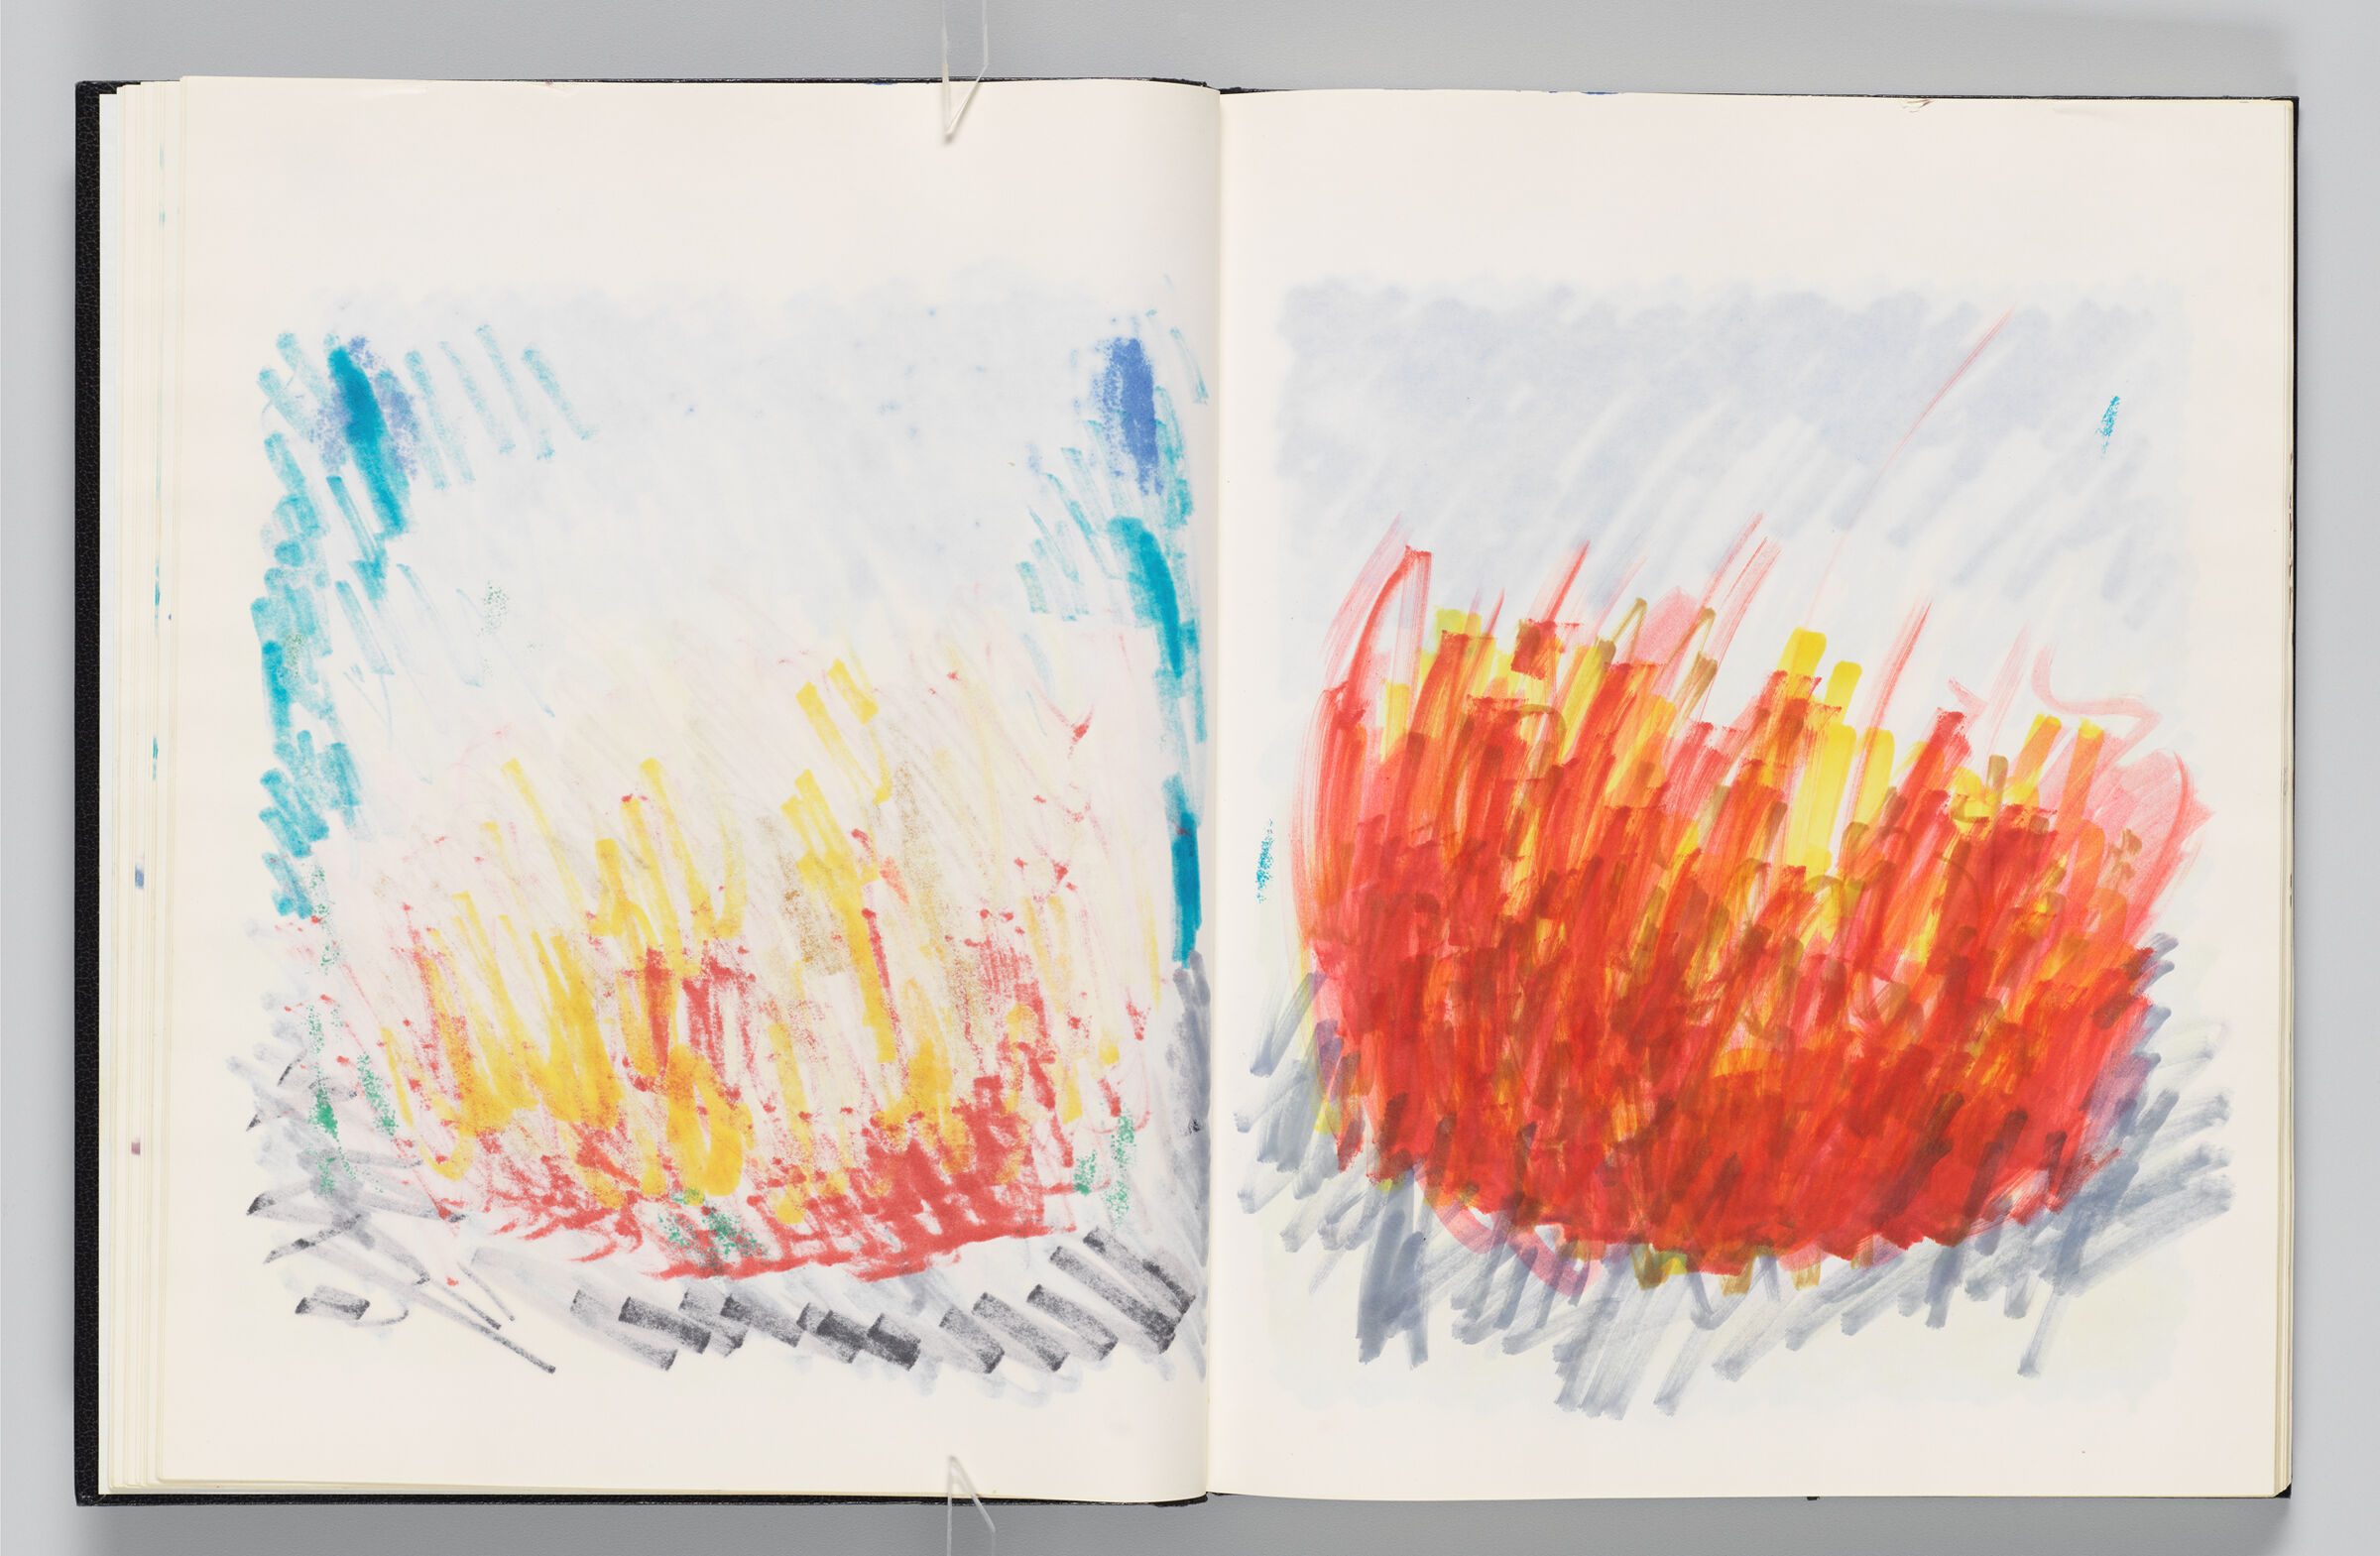 Untitled (Bleed-Through Of Previous Page, Left Page); Untitled (Abstract Sketch With Color Transfer, Right Page)